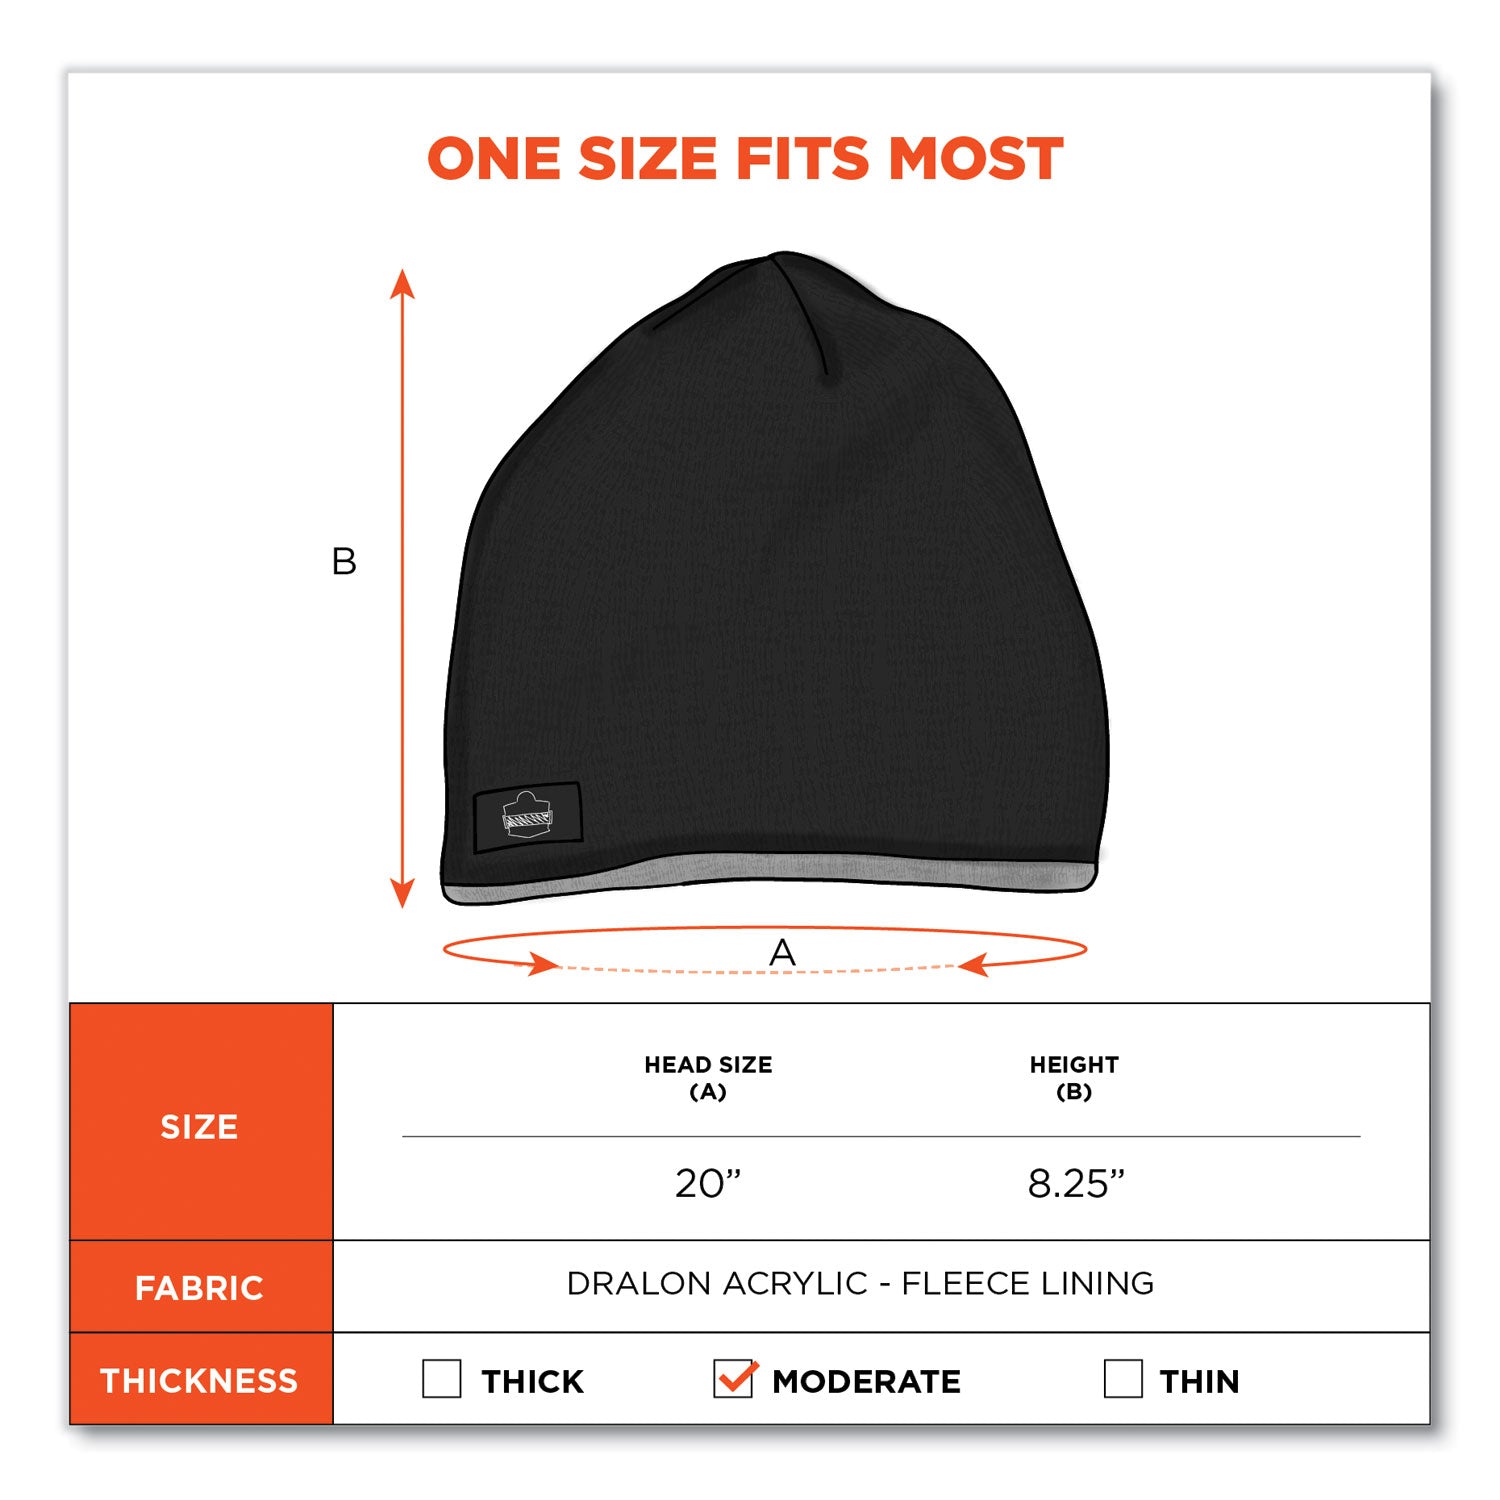 n-ferno-6818-knit-winter-hat-fleece-lined-one-size-fits-most-black-ships-in-1-3-business-days_ego16818 - 5